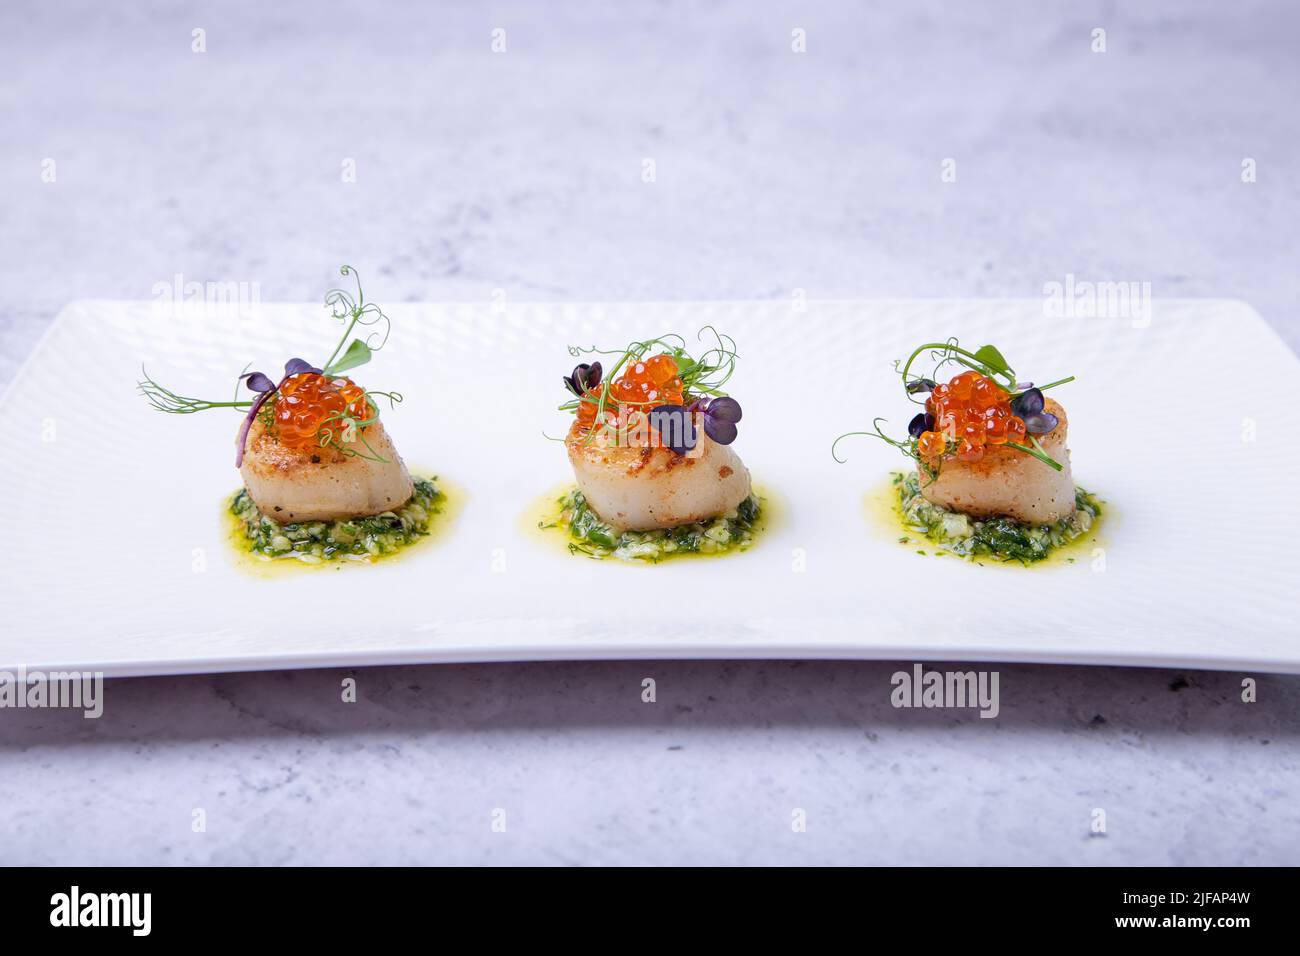 Scallops with caviar, microgreens and green sauce on a white plate. Close-up. Stock Photo